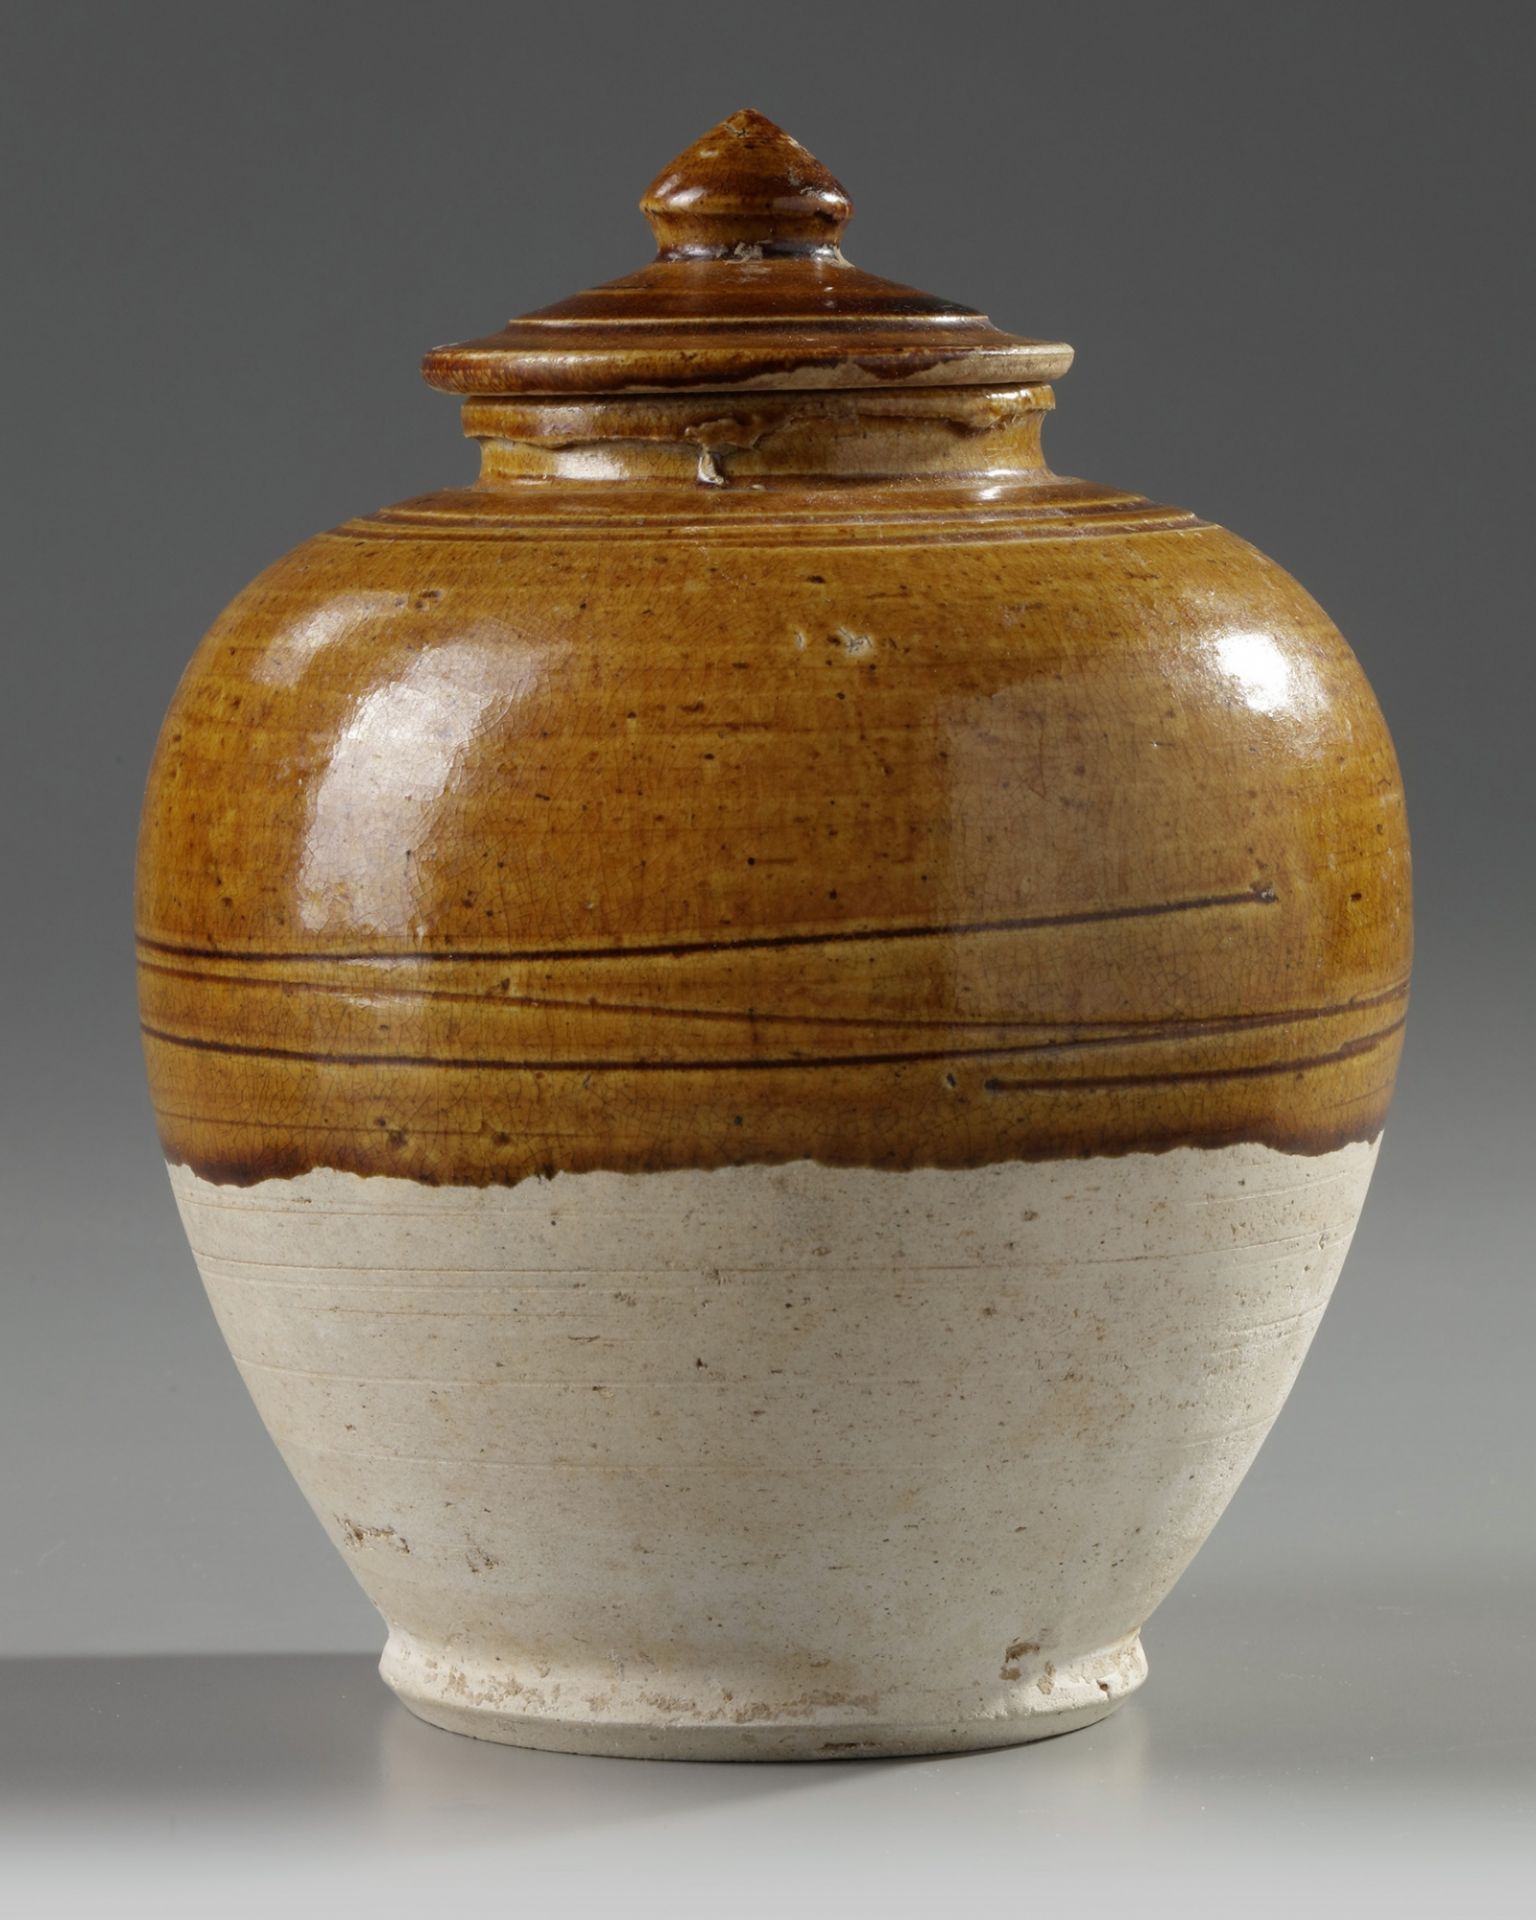 A CHINESE AMBER-GLAZED JAR AND COVER, TANG DYNASTY (618-907) - Image 2 of 4